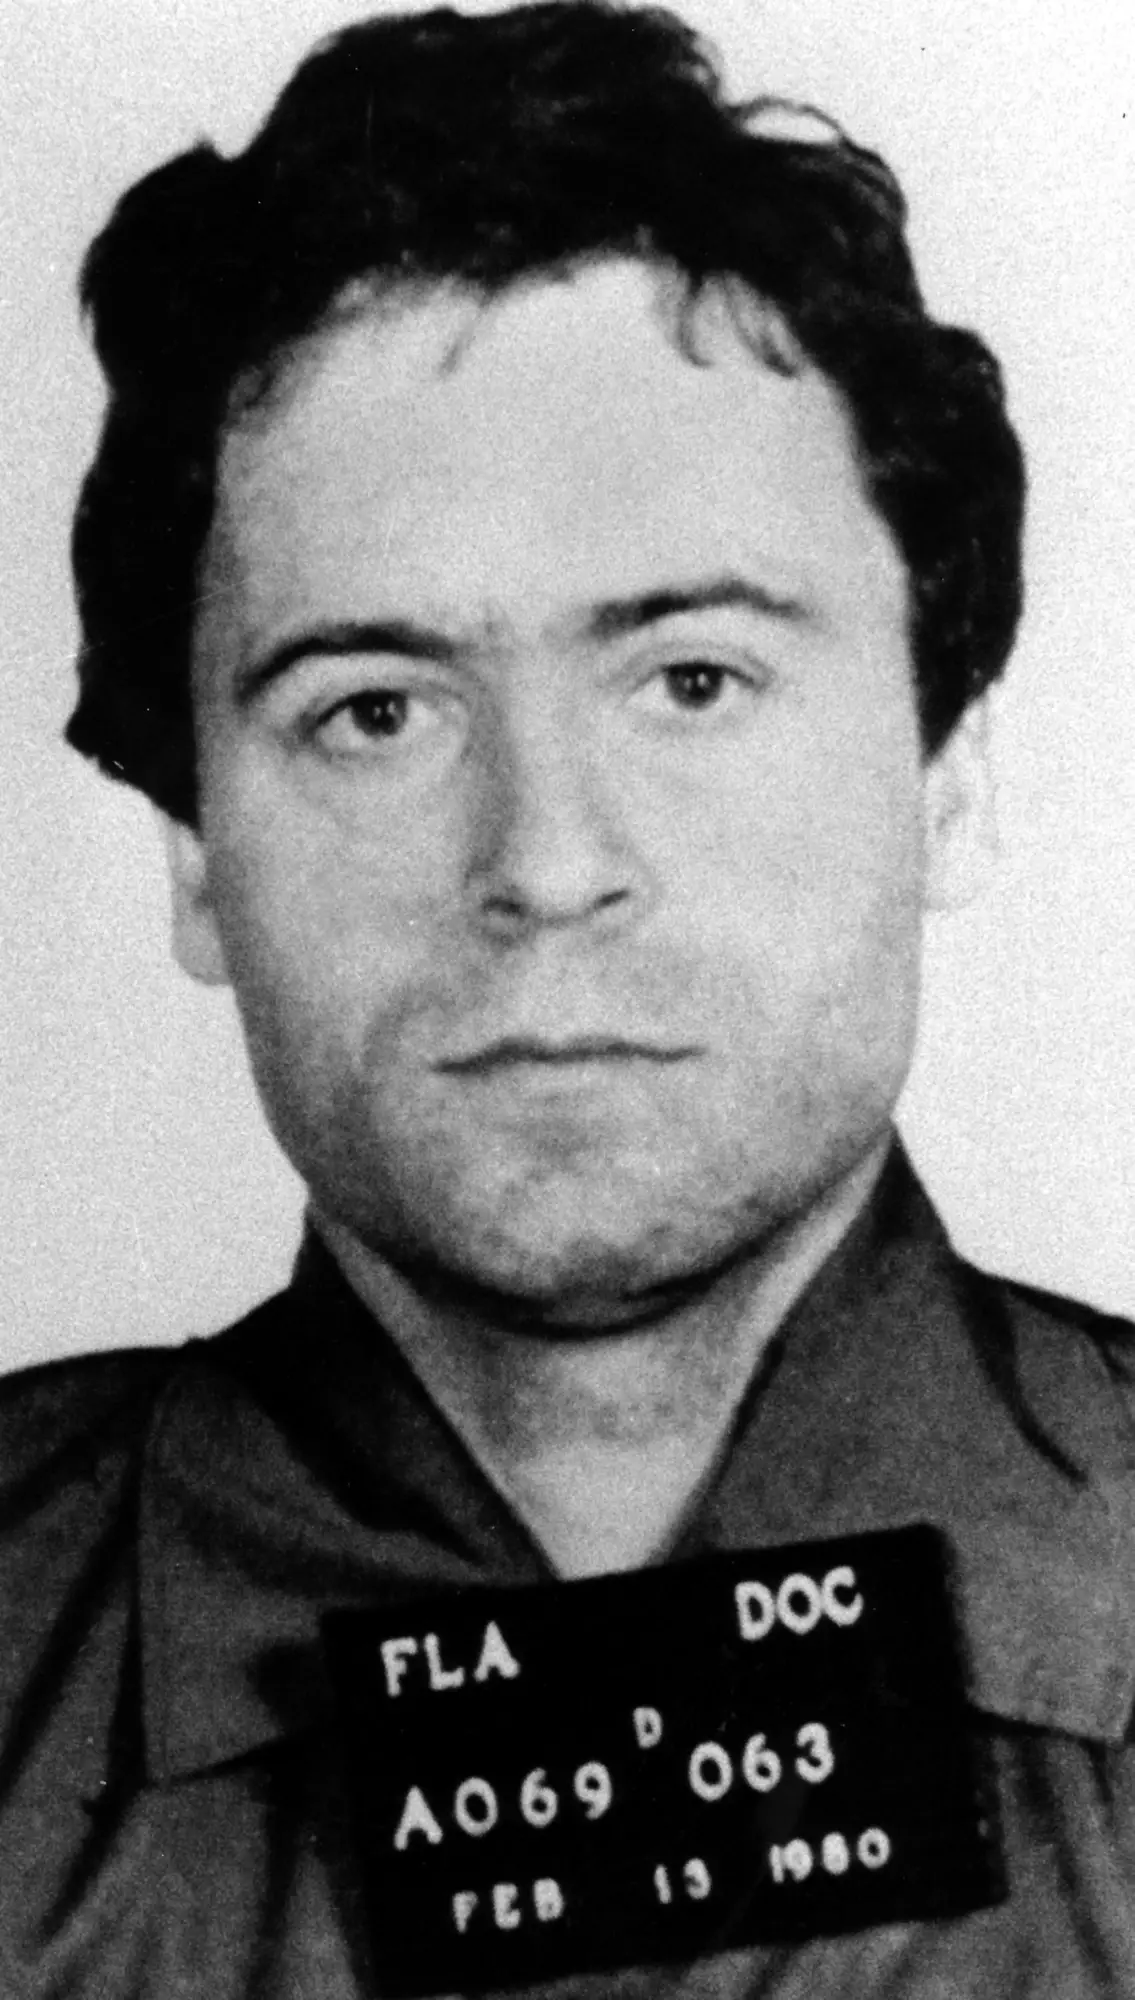 Ted Bundy's violent attacks are vividly retold by his victims (